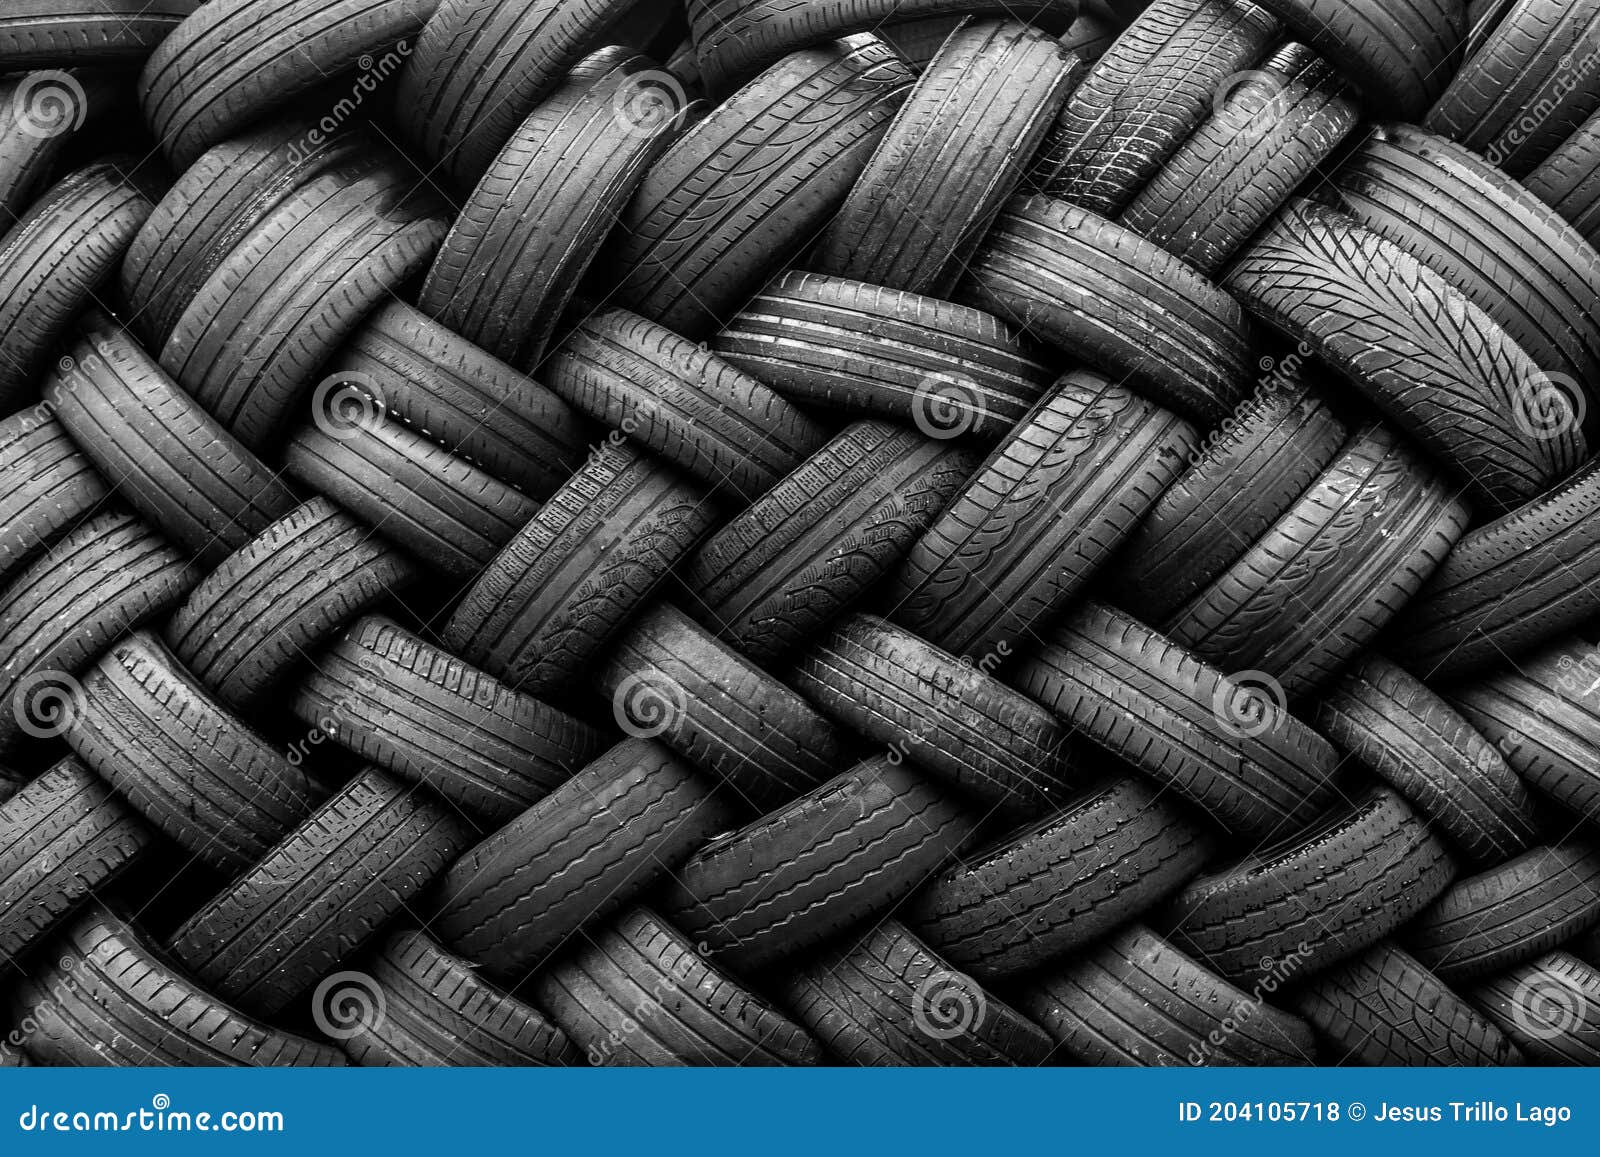 old used car tires. a pile of black tires, abstract background.